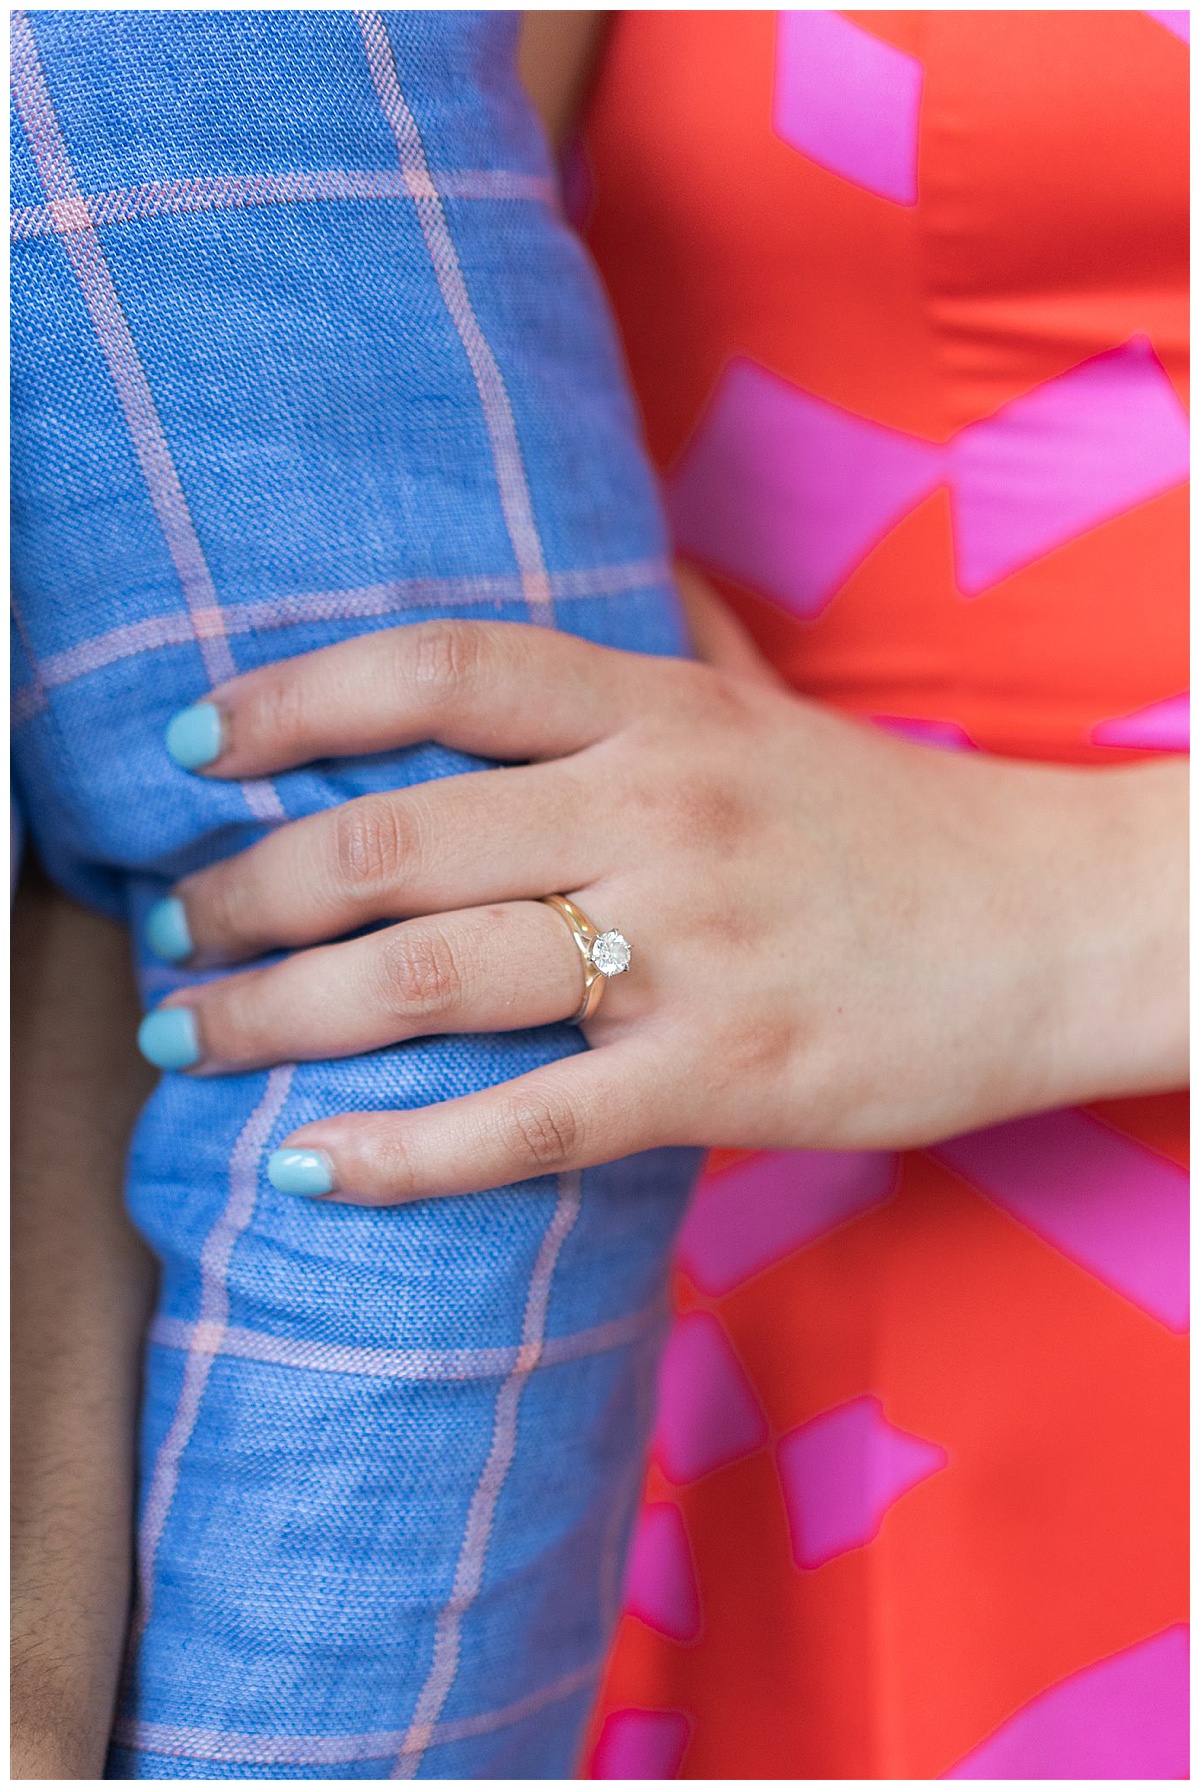 Stunning engagement ring for Swish & Click Photography